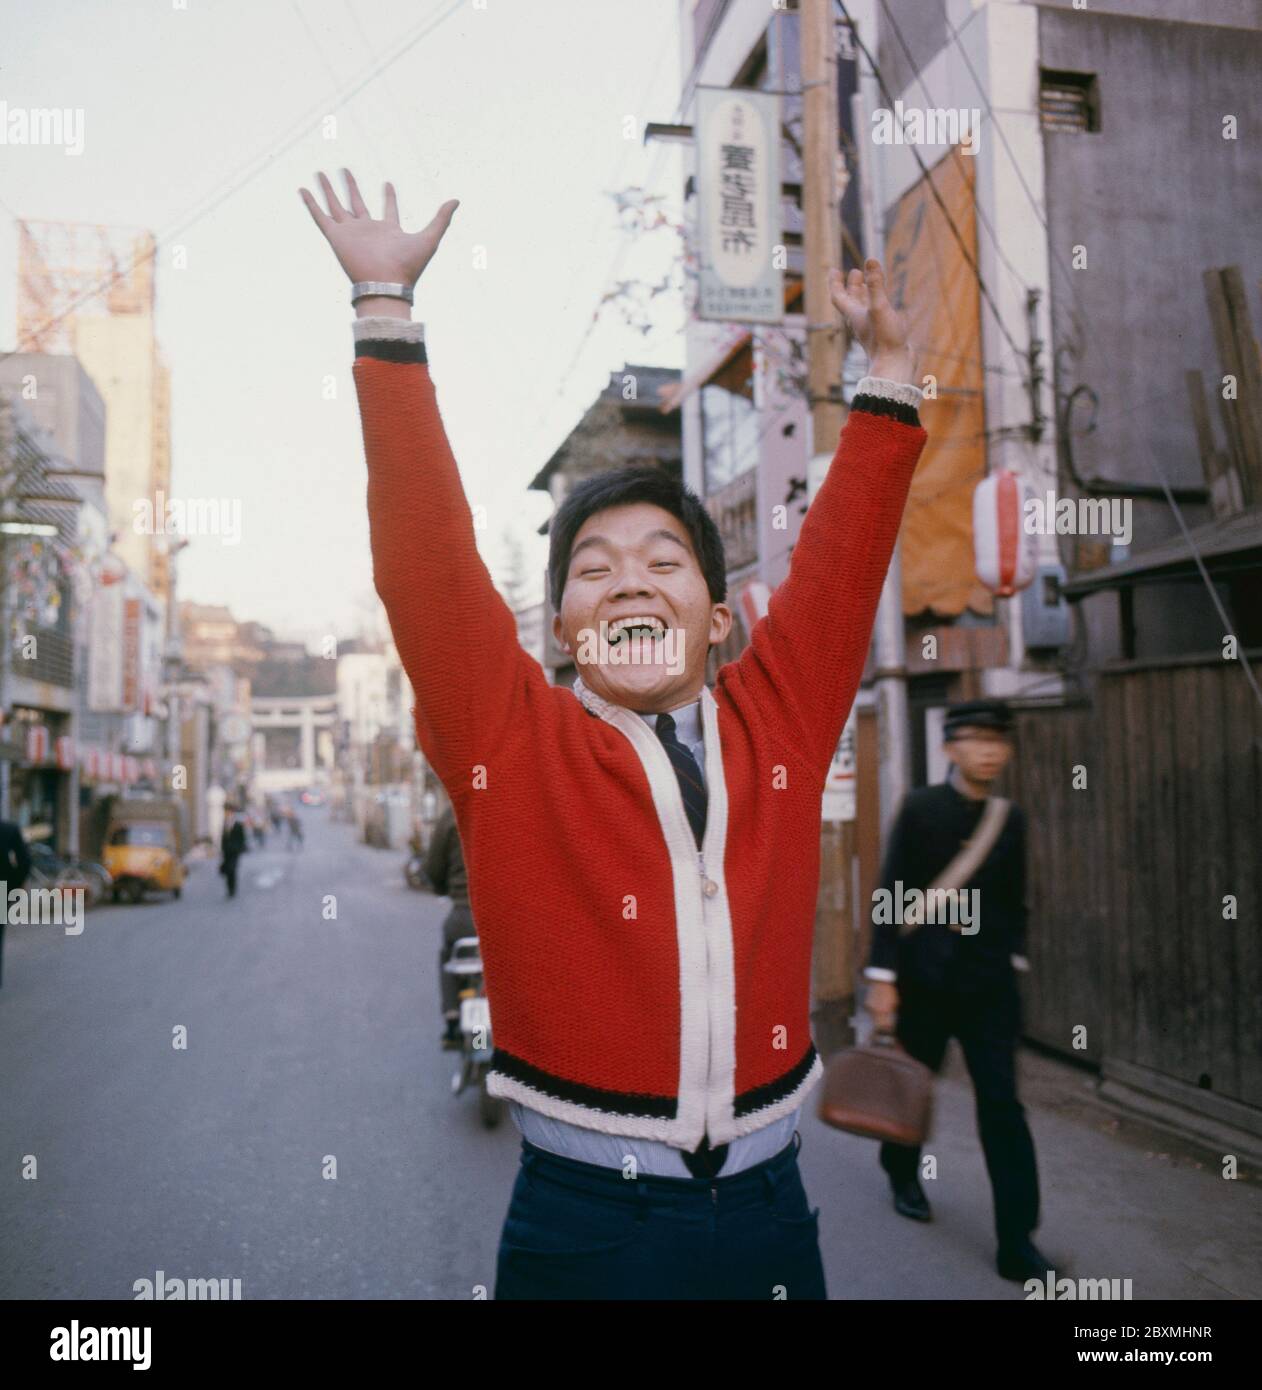 Kyu Sakamoto. (1941-1985) Japanese singer, best known outside Japan for his international hit song 'Ue o Muite Aruko' (known as 'Sukiyaki' in English-speaking markets), which was sung in Japanese and sold over 13 million copies. It reached number one in the United States Billboard Hot 100 in June 1963, making Sakamoto the first Asian recording artist to have a number one song on the chart. Stock Photo